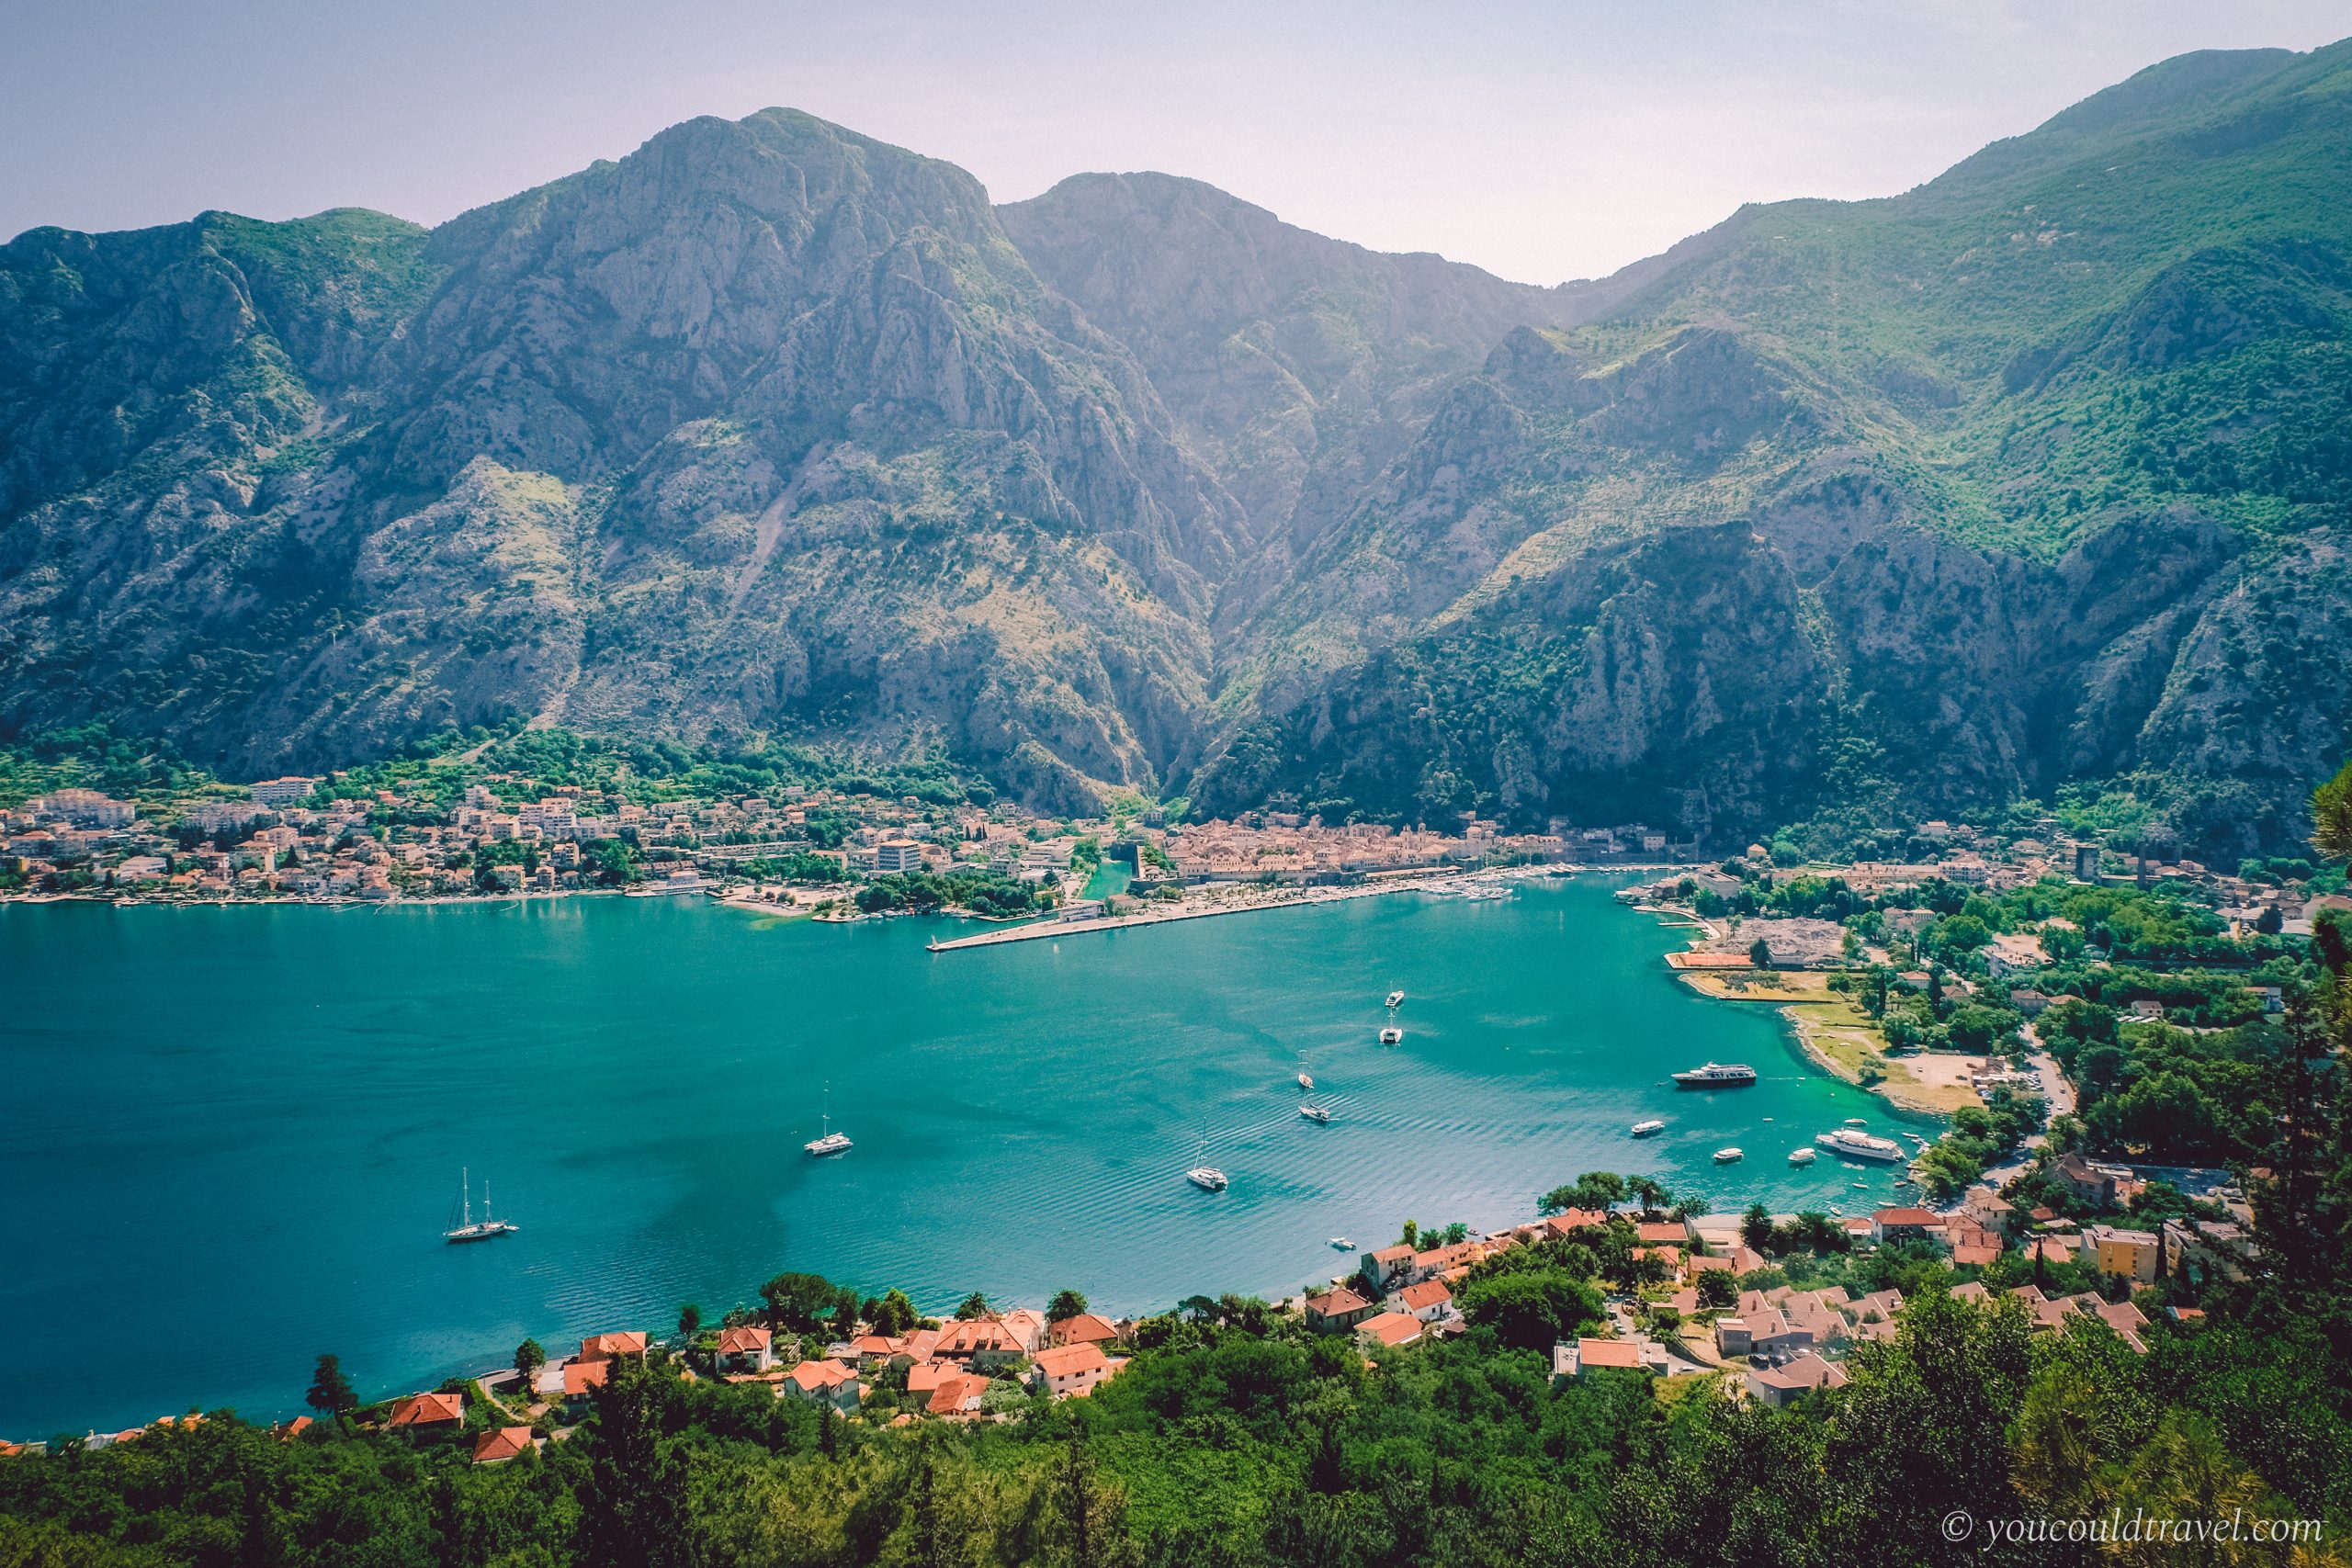 Gorgeous view of Kotor Bay surrounded by mountains